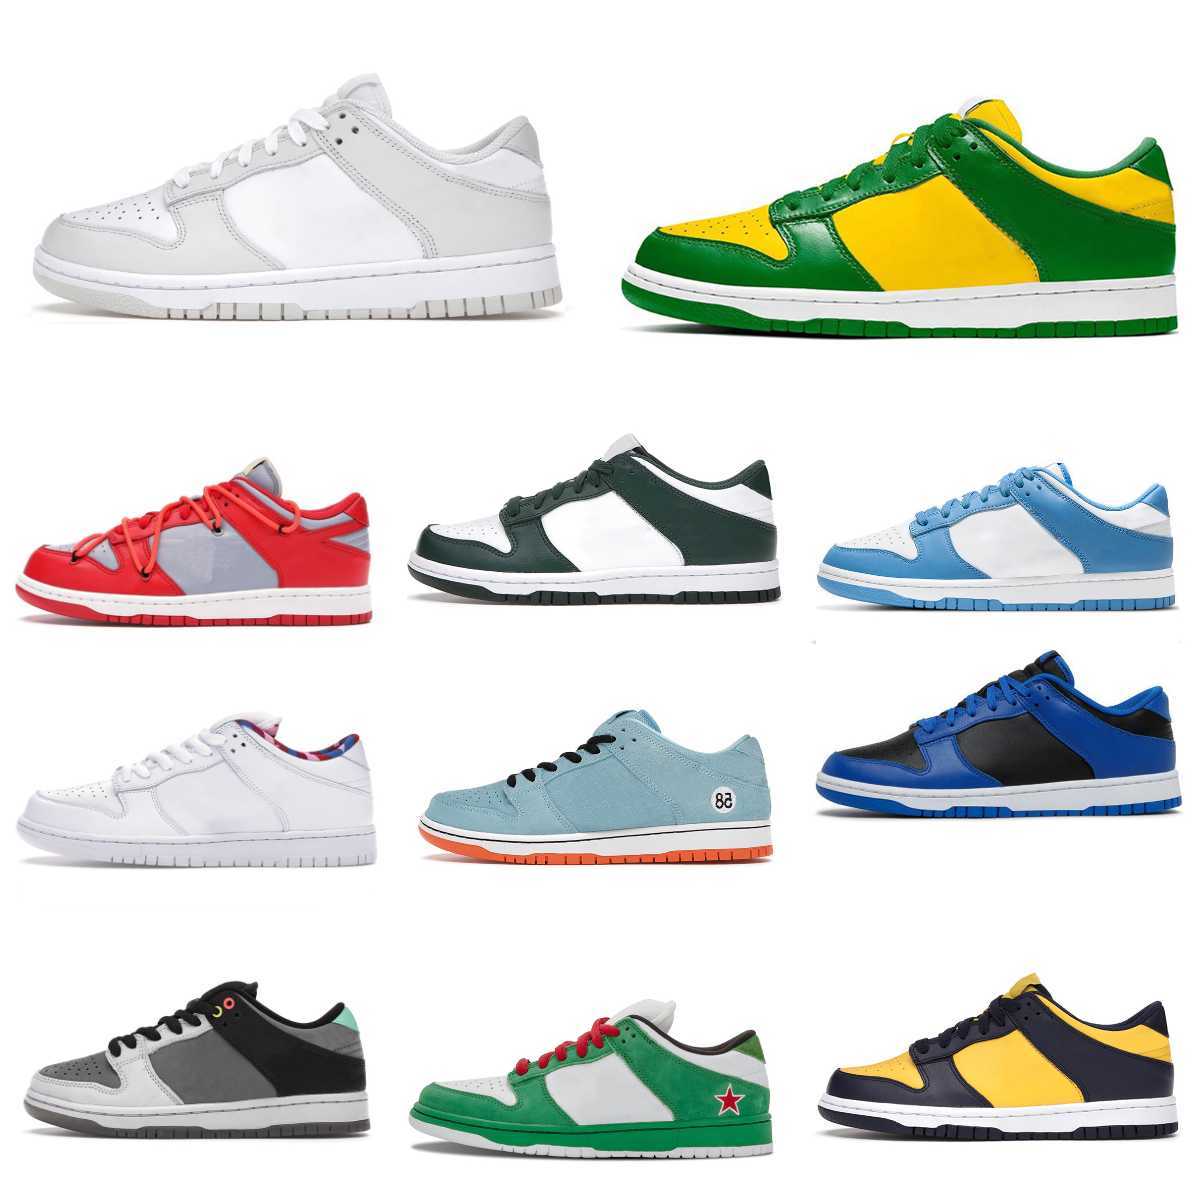 

SB Designers Lows Running Shoes DuNkS Grey Fog Black White UNC University Red Women Men Atmos Elephant Lime Ice Barely Parra Abstract Art Green Bear Trainer Sneakers, # 36-45 valerian blue